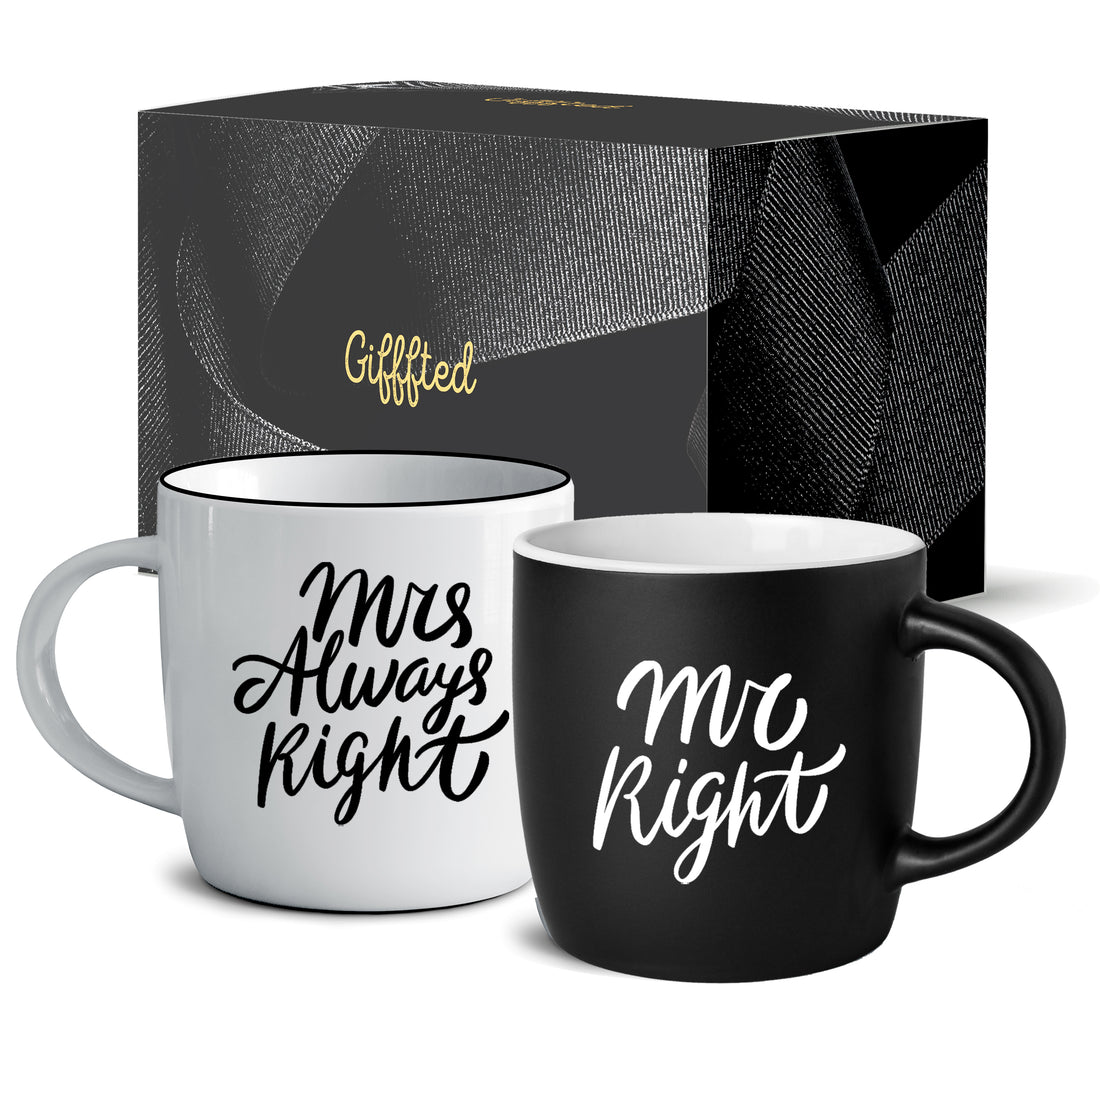 Mr Right and Mrs Always Right Mugs Black and White